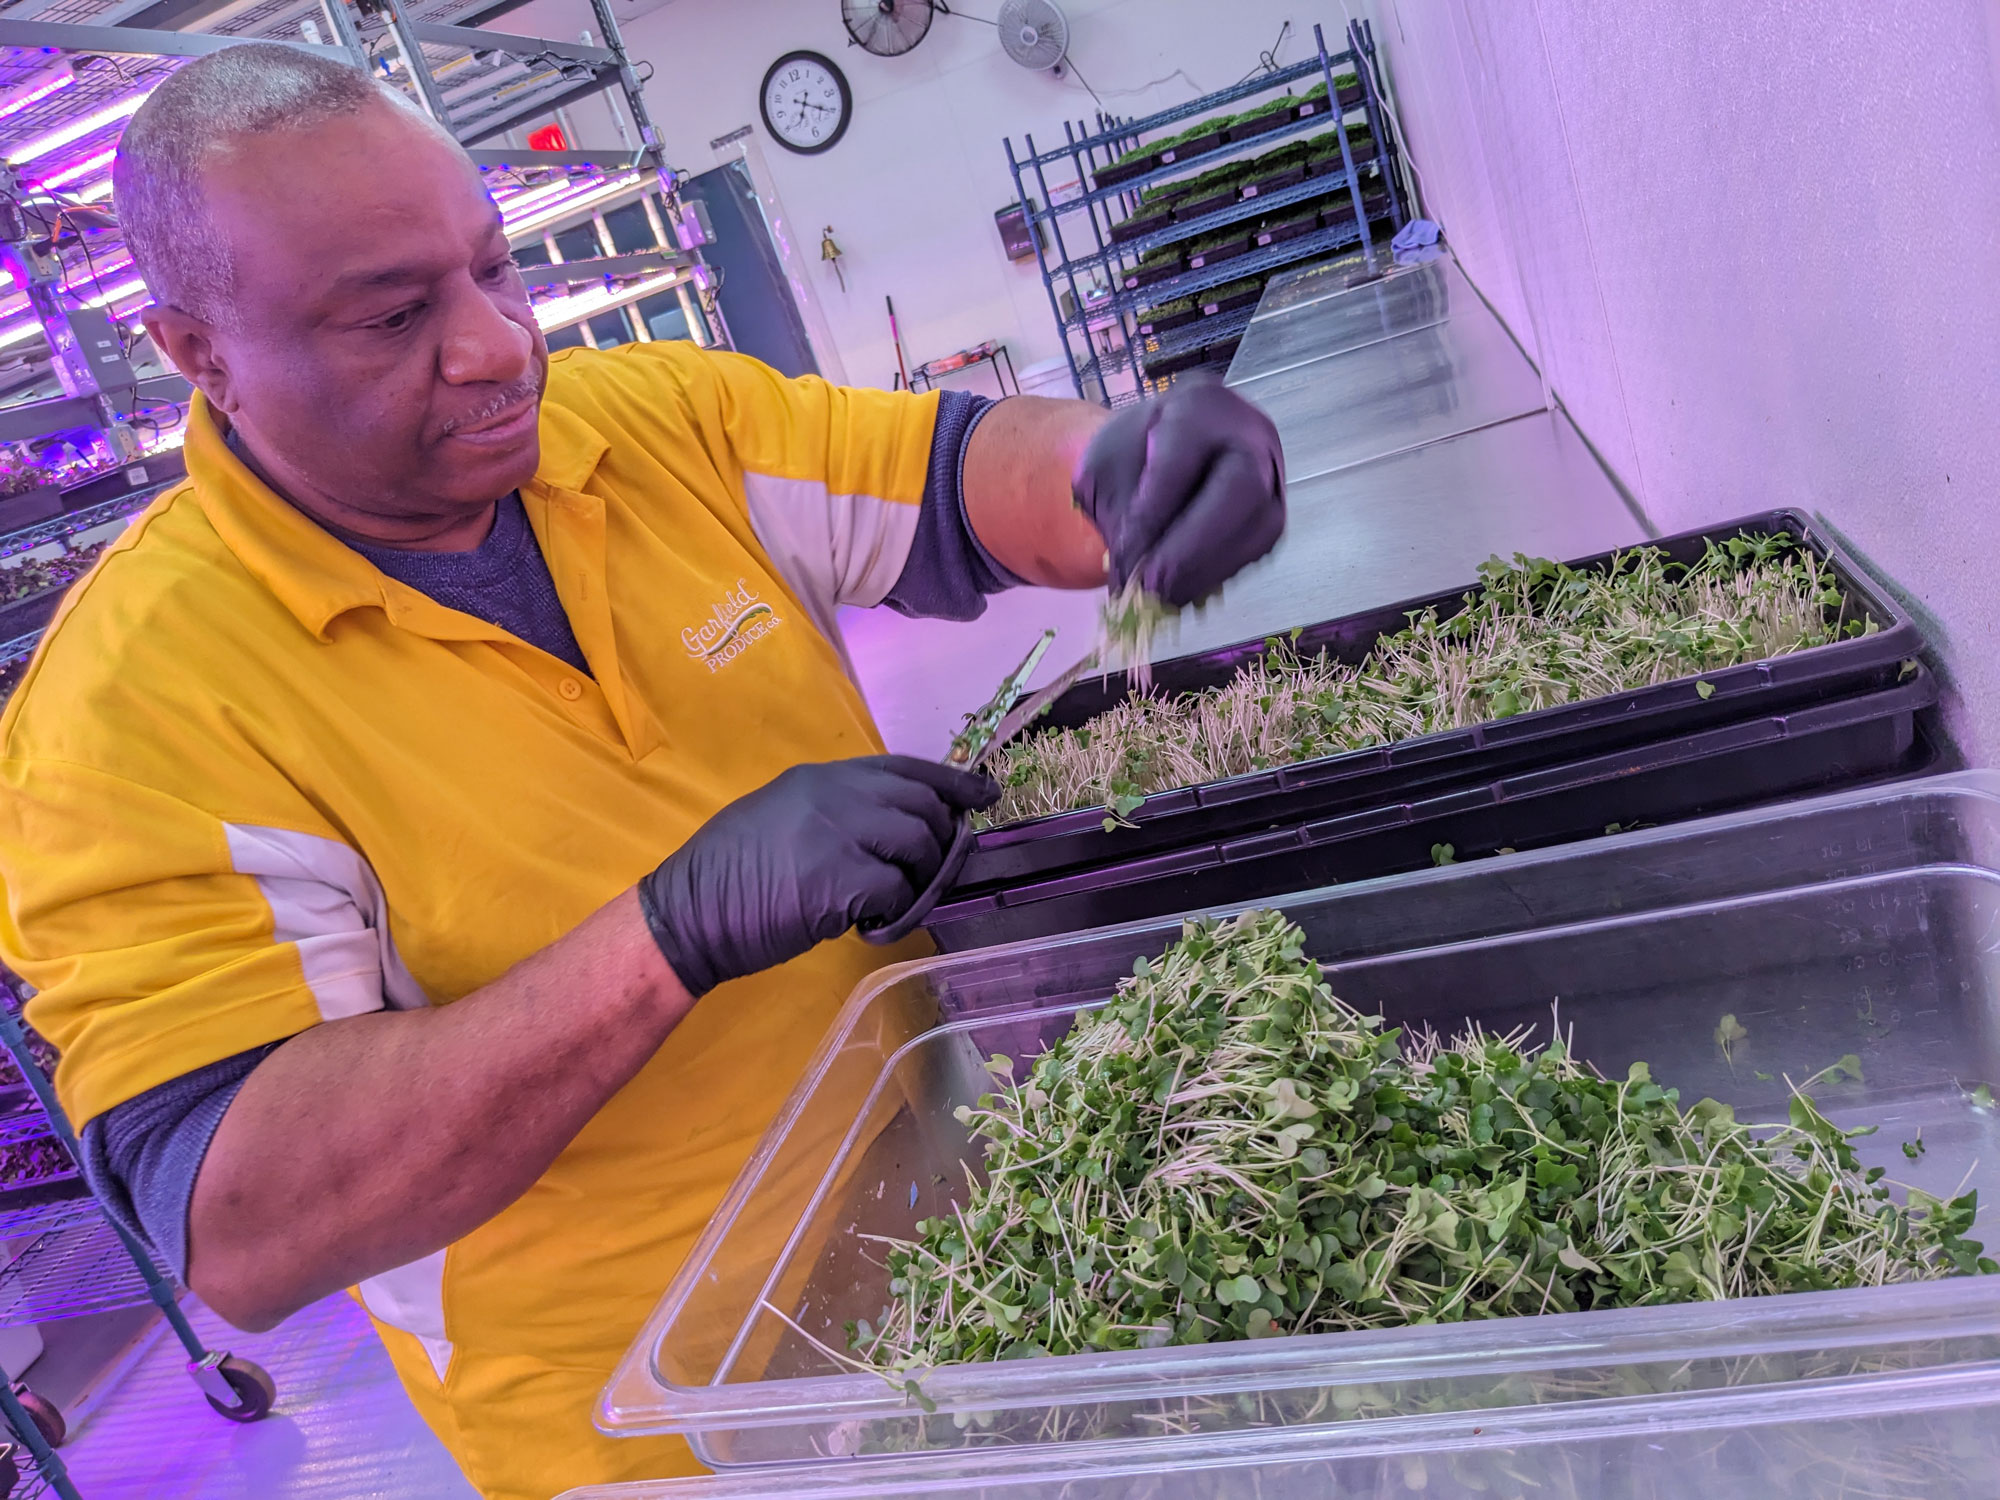 A middle-aged man in an indoor farm uses scissors to cut microgreens from a growing tray and place them in a plastic bin